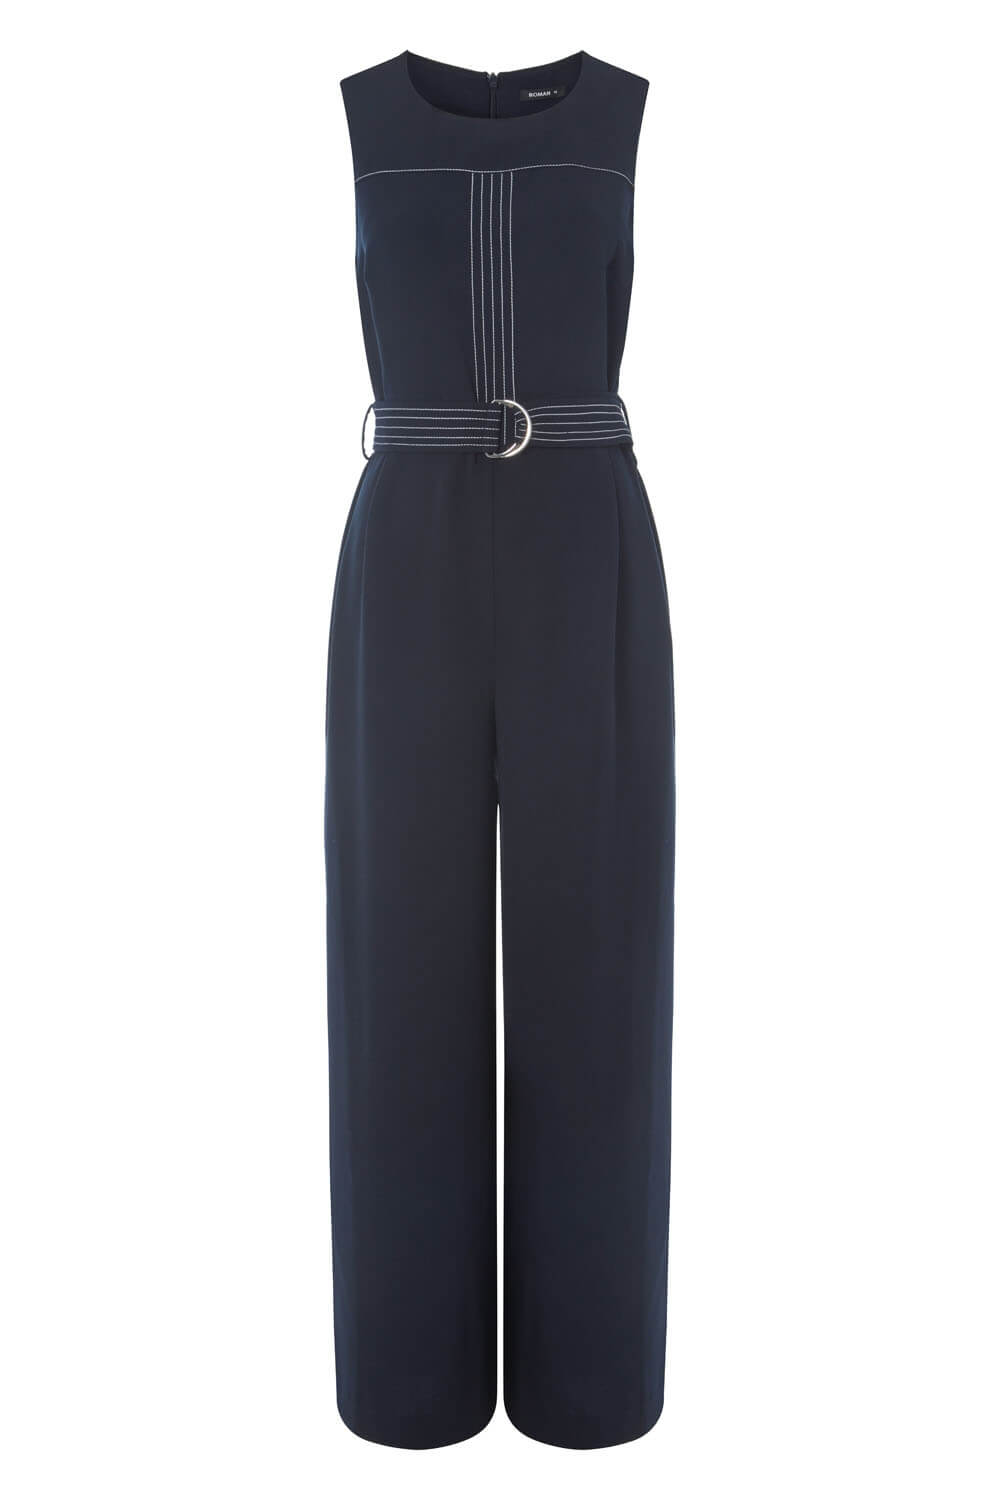 Navy  Top Stitch Belted Jumpsuit, Image 4 of 4